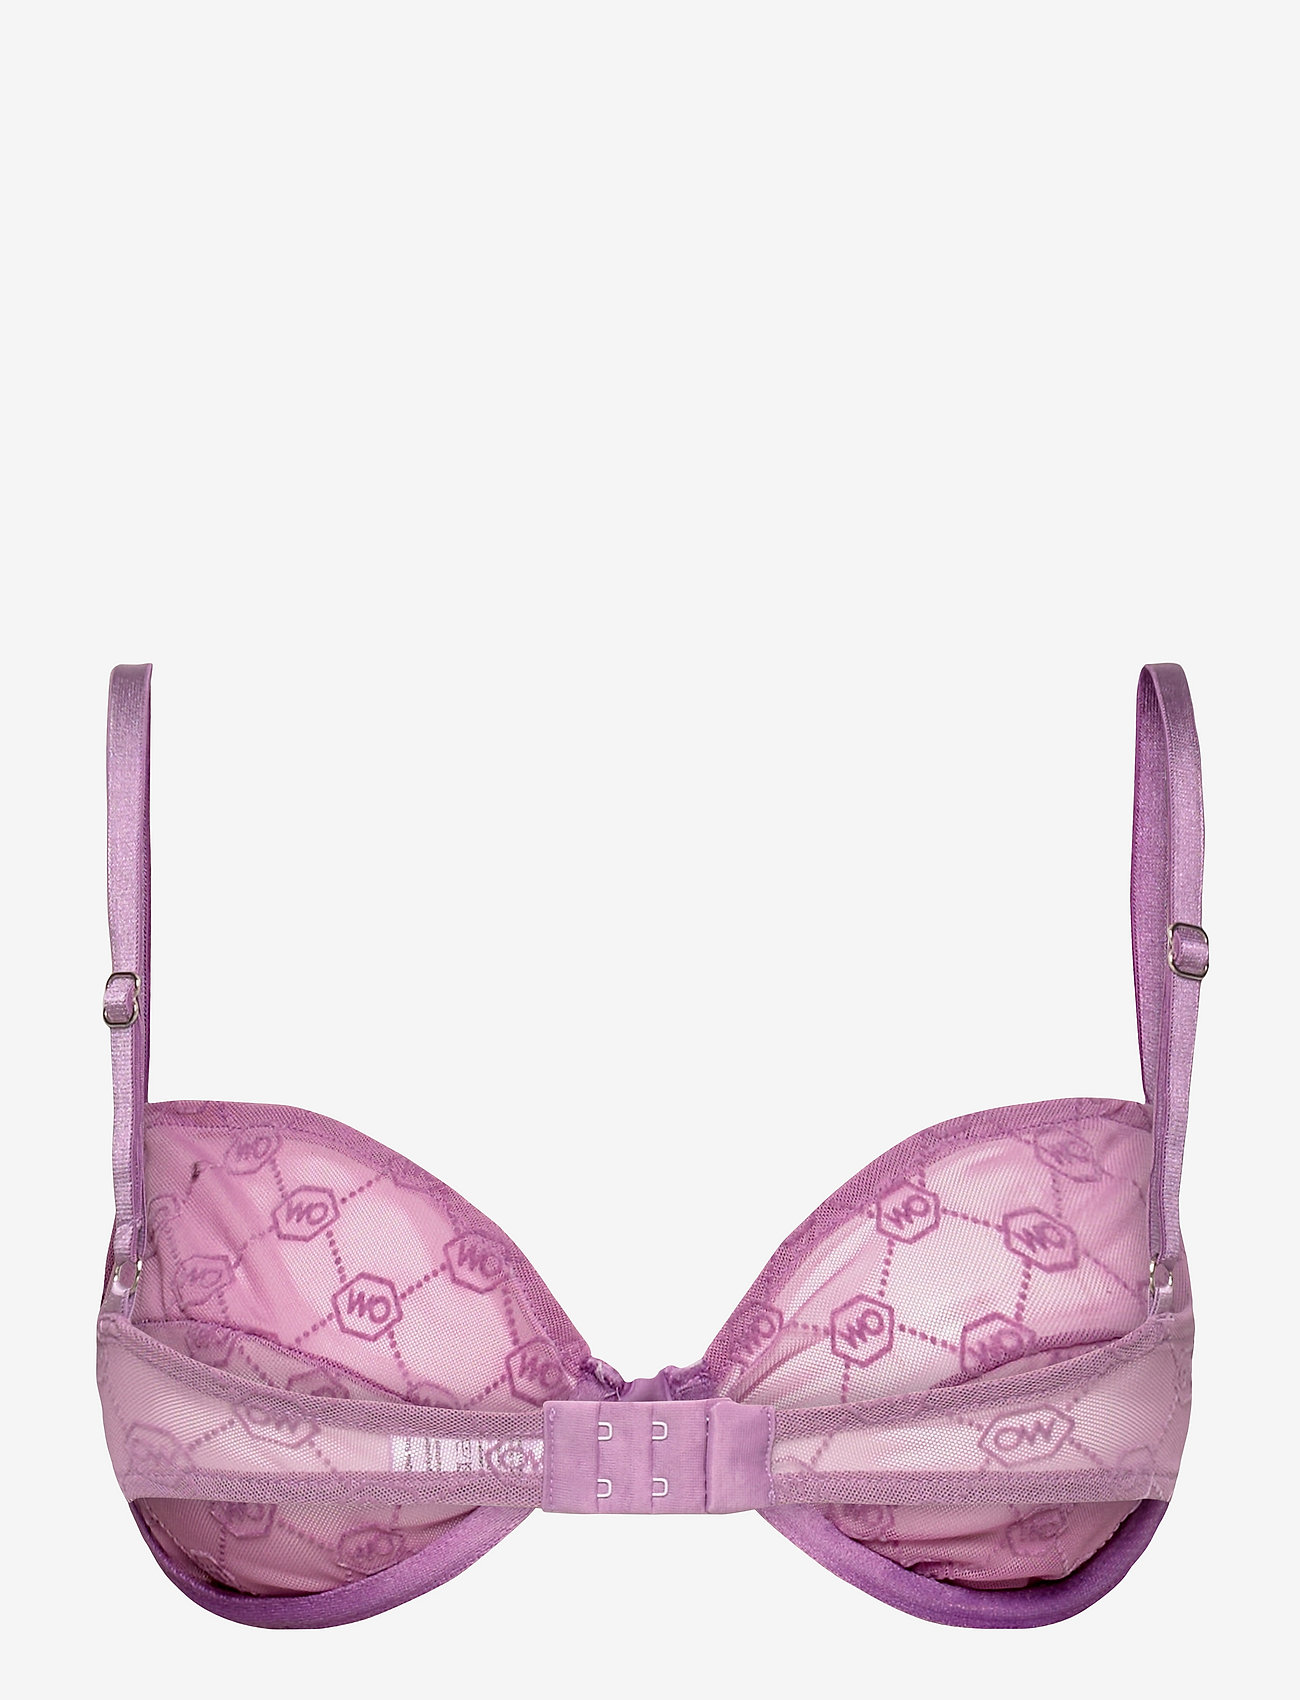 OW Collection - OW MONA Bra - wired bras - purple - 1